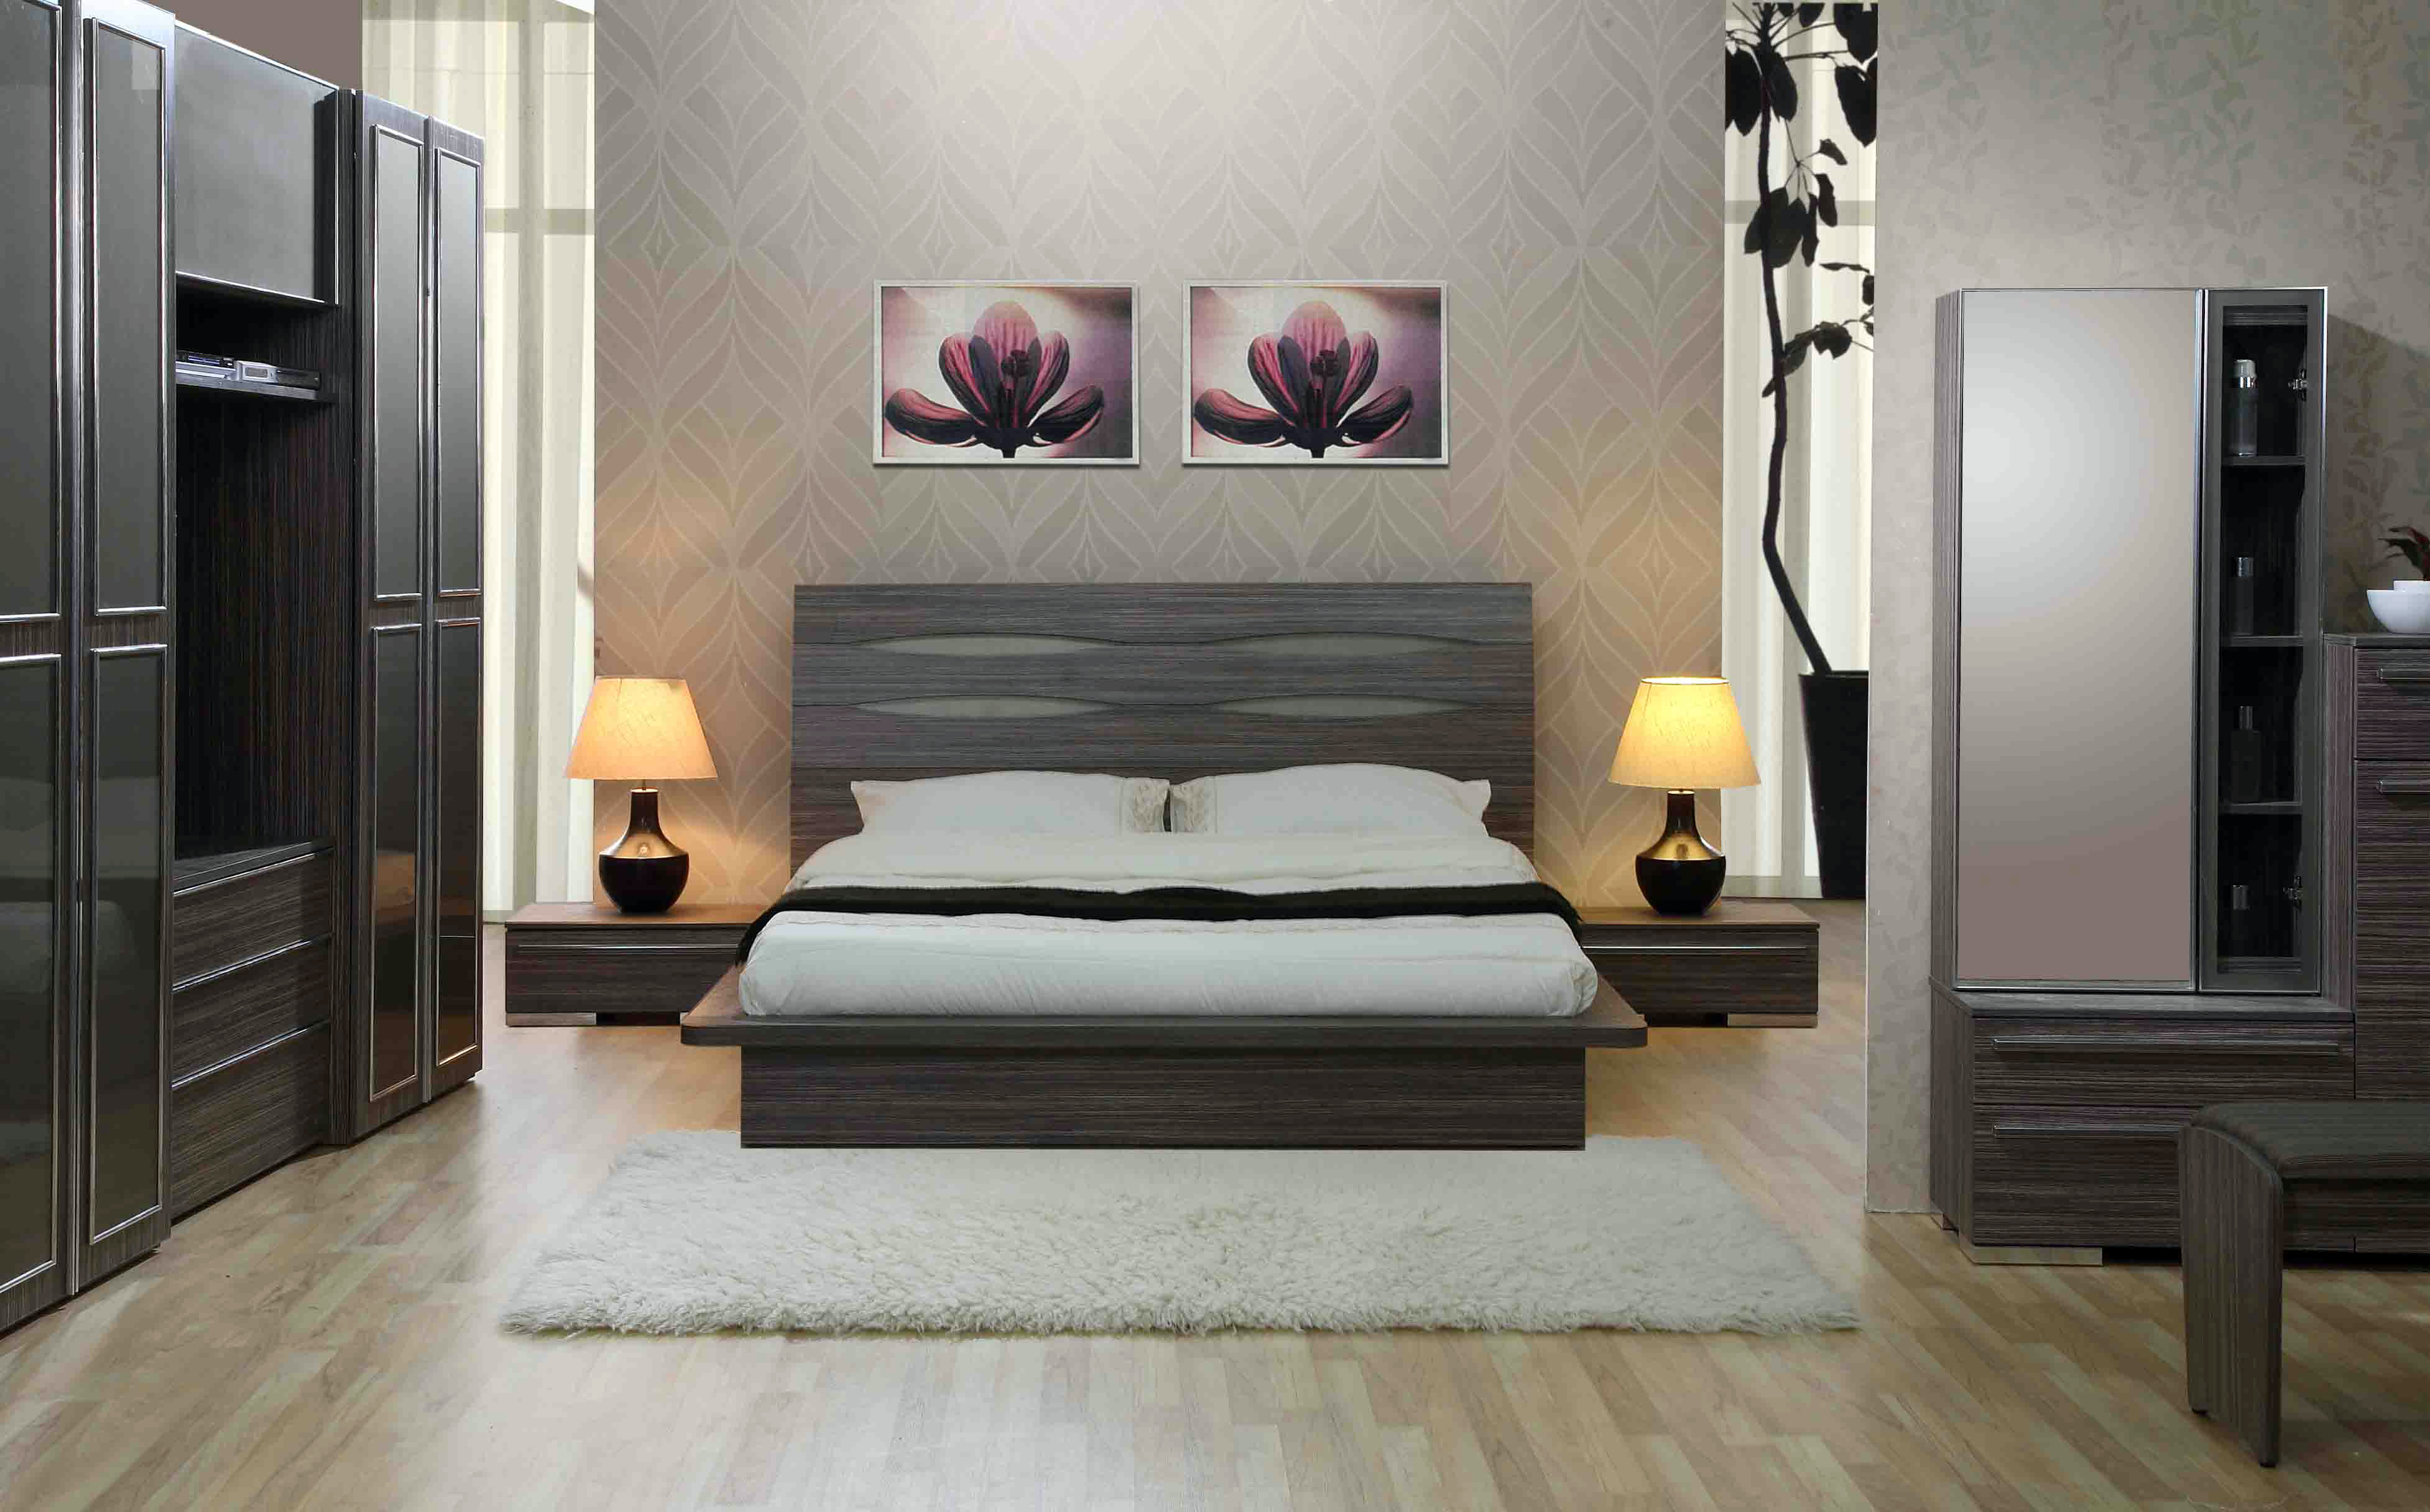 25 Best Bedroom Designs Ideas The WoW Style